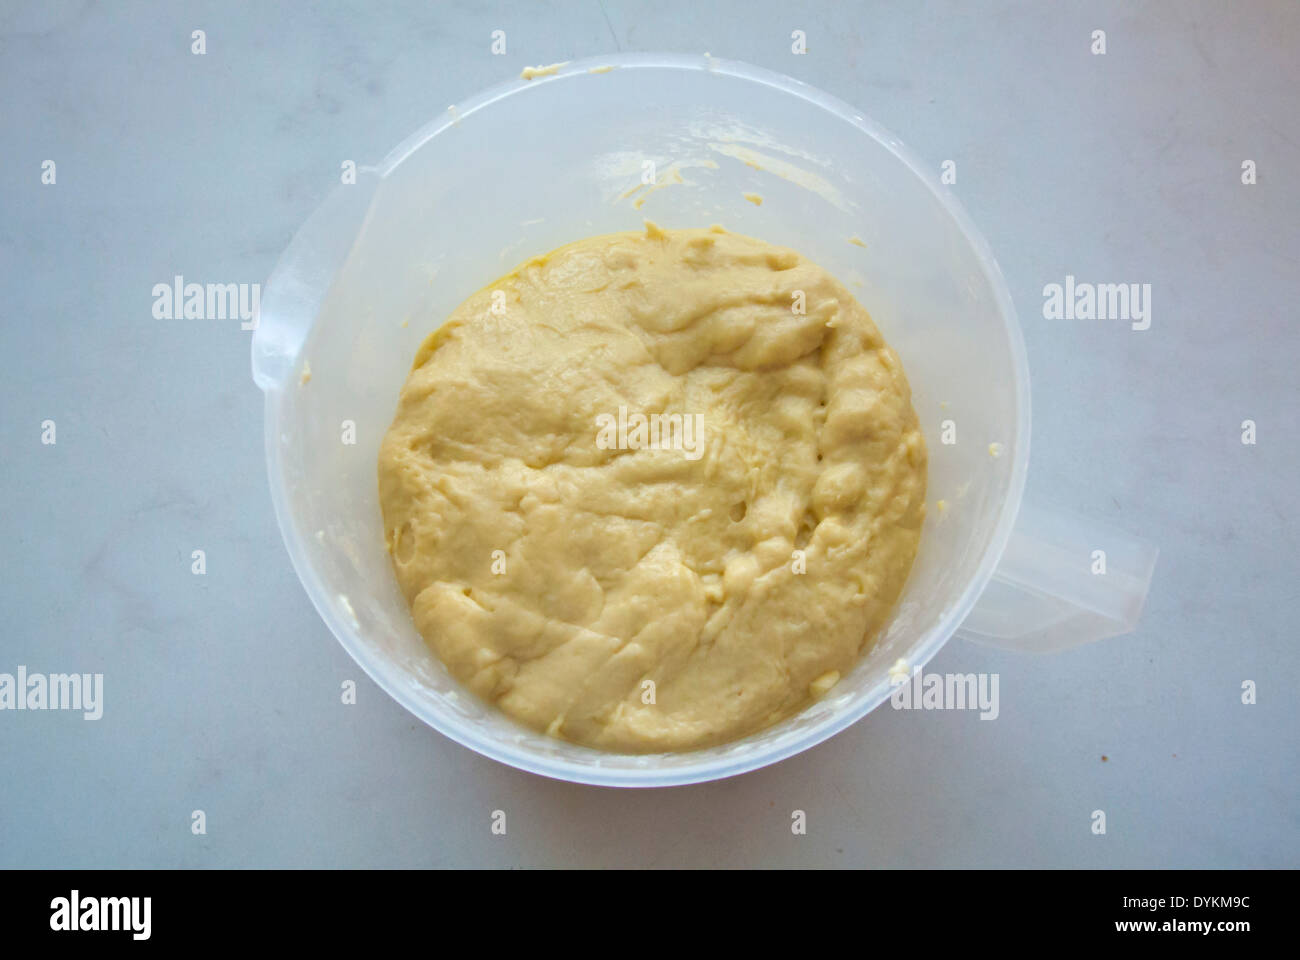 Dough rising for sweet bread rolls, Finland, Europe Stock Photo